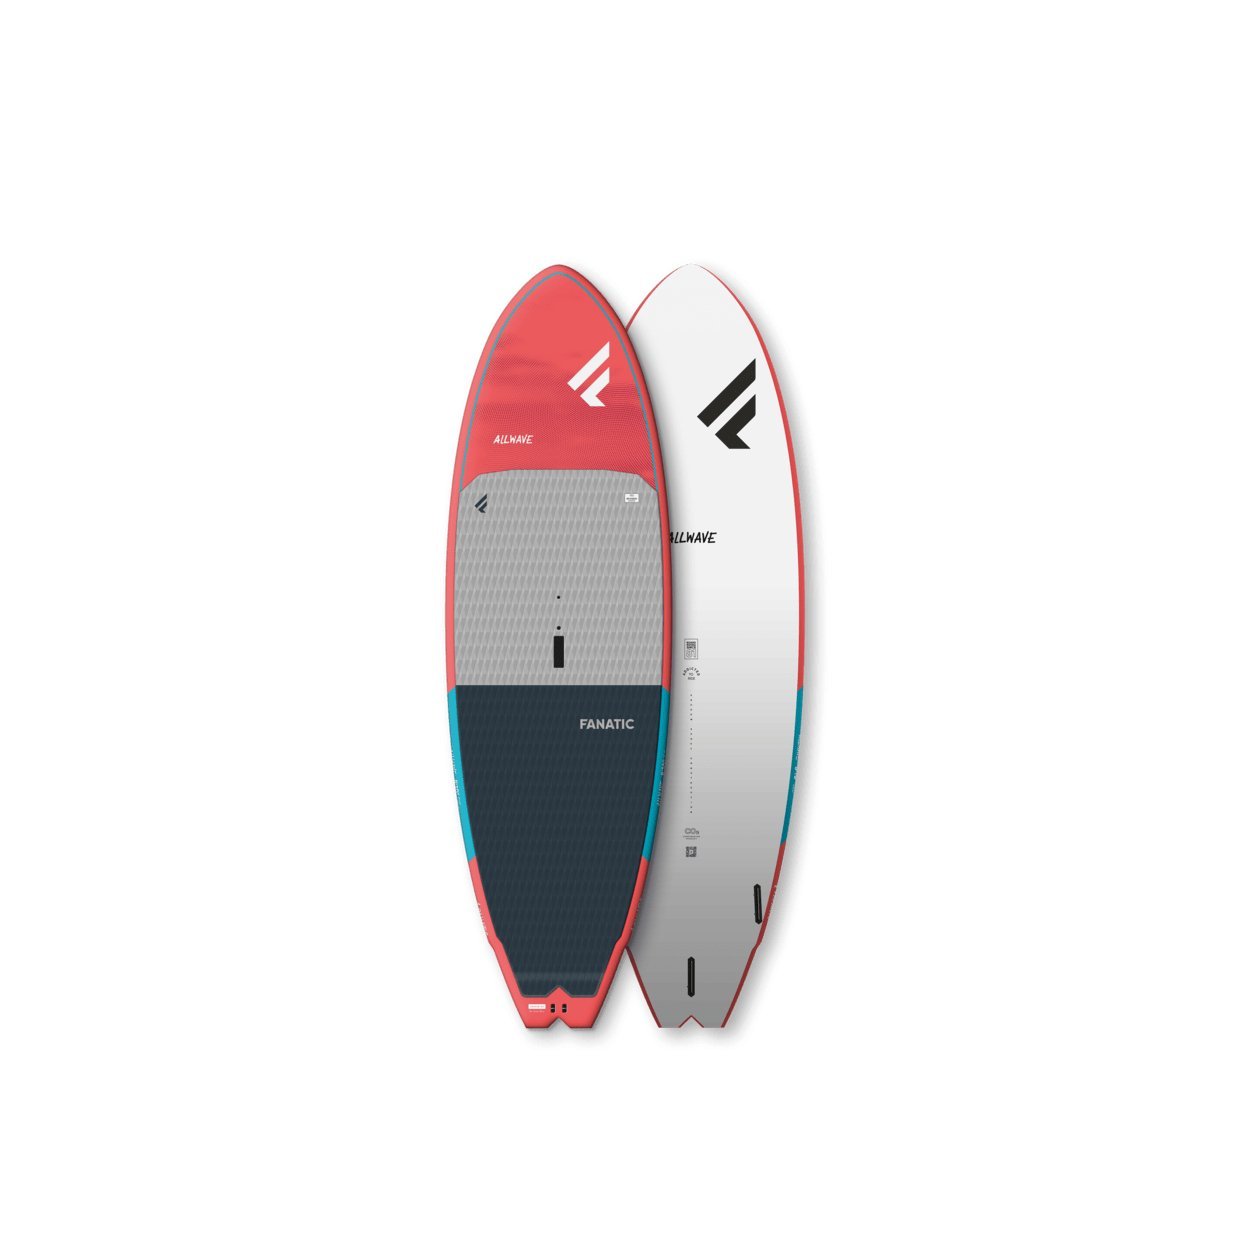 Repaired Fanatic AllWave 2023 - Worthing Watersports - 9010583133522 - SUP Composite - Fanatic SUP